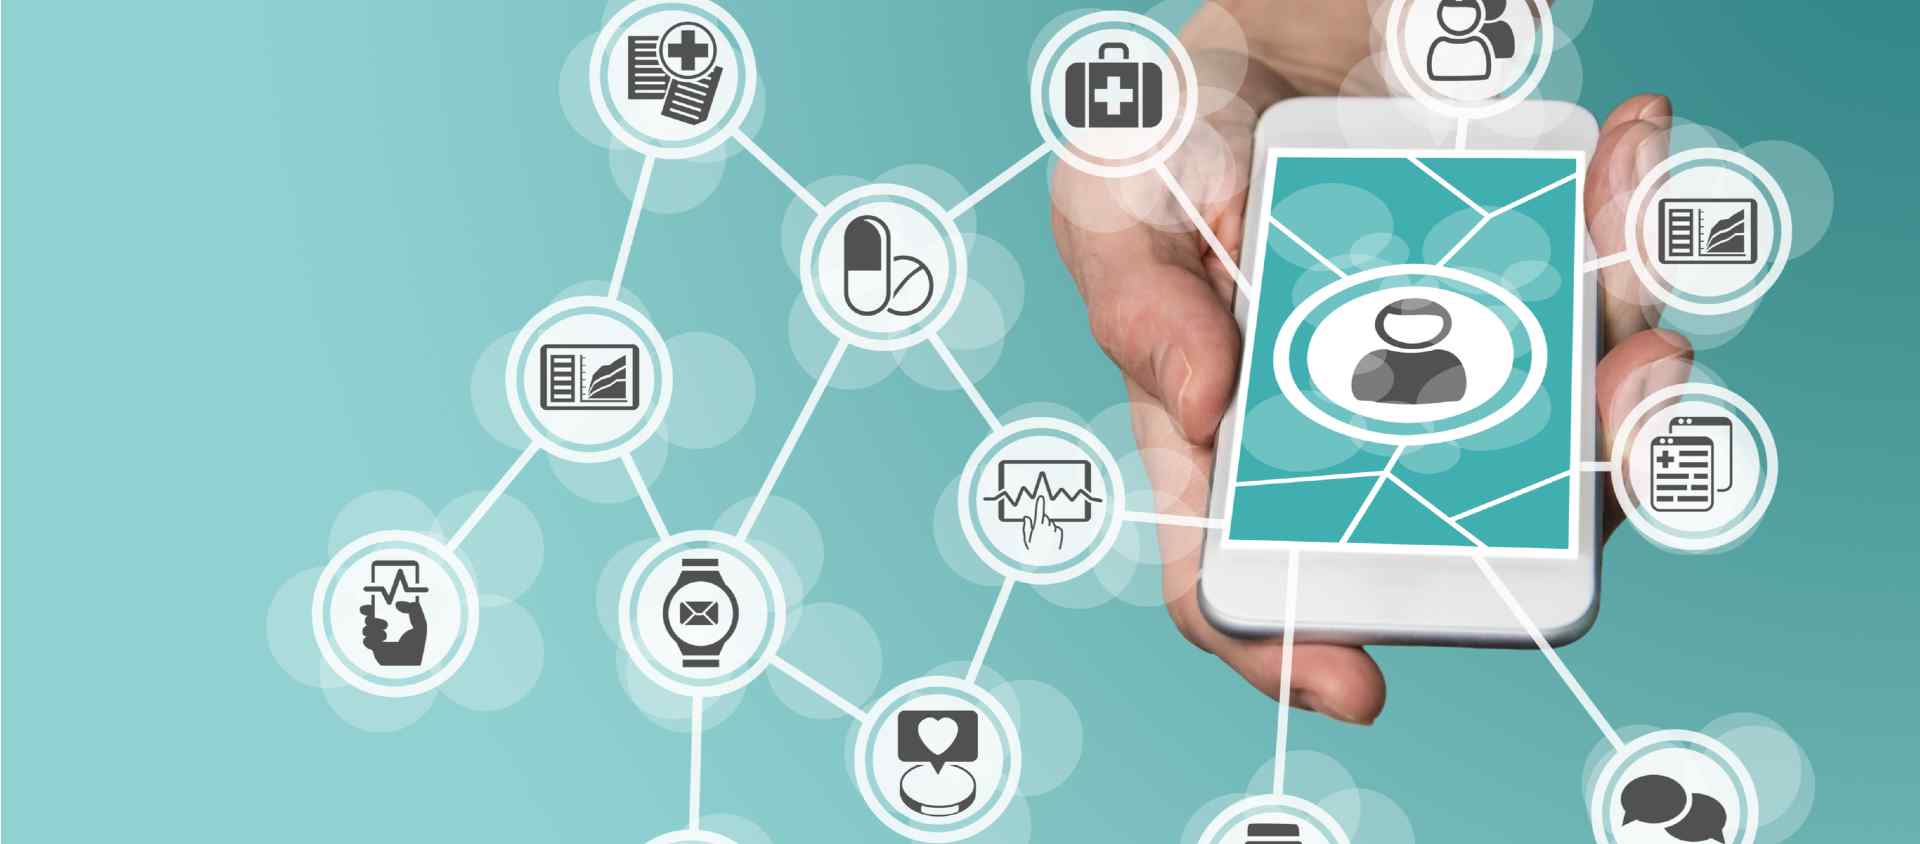 4 Payer Highlights From New eHealth Marketplace Study